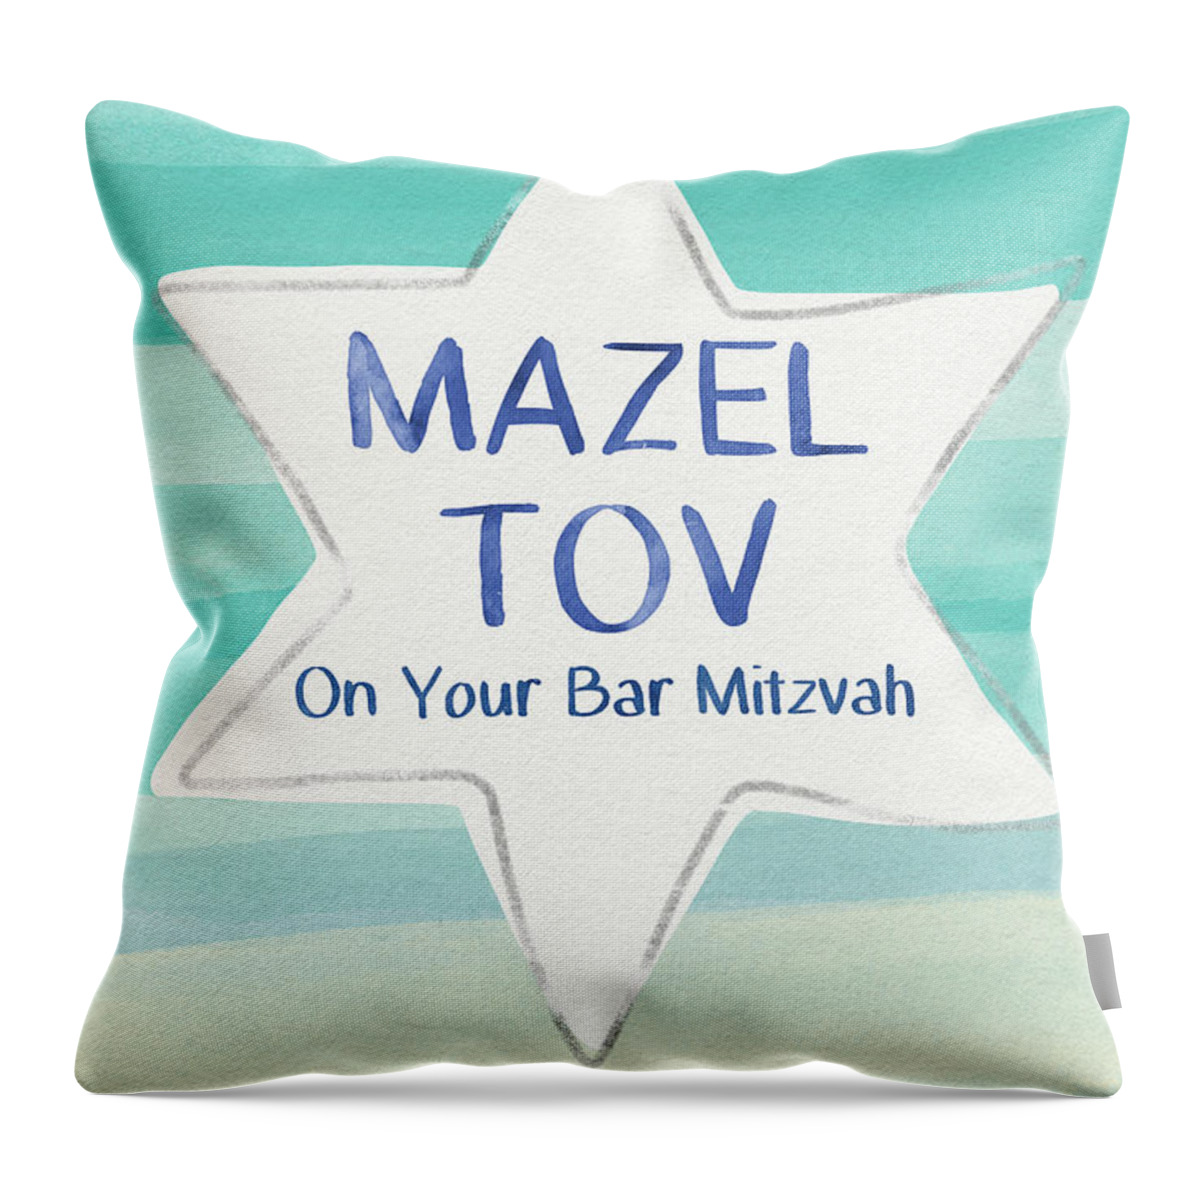 Bar Mitzvah Throw Pillow featuring the painting Mazel Tov On Your Bar Mitzvah- Art by Linda Woods by Linda Woods